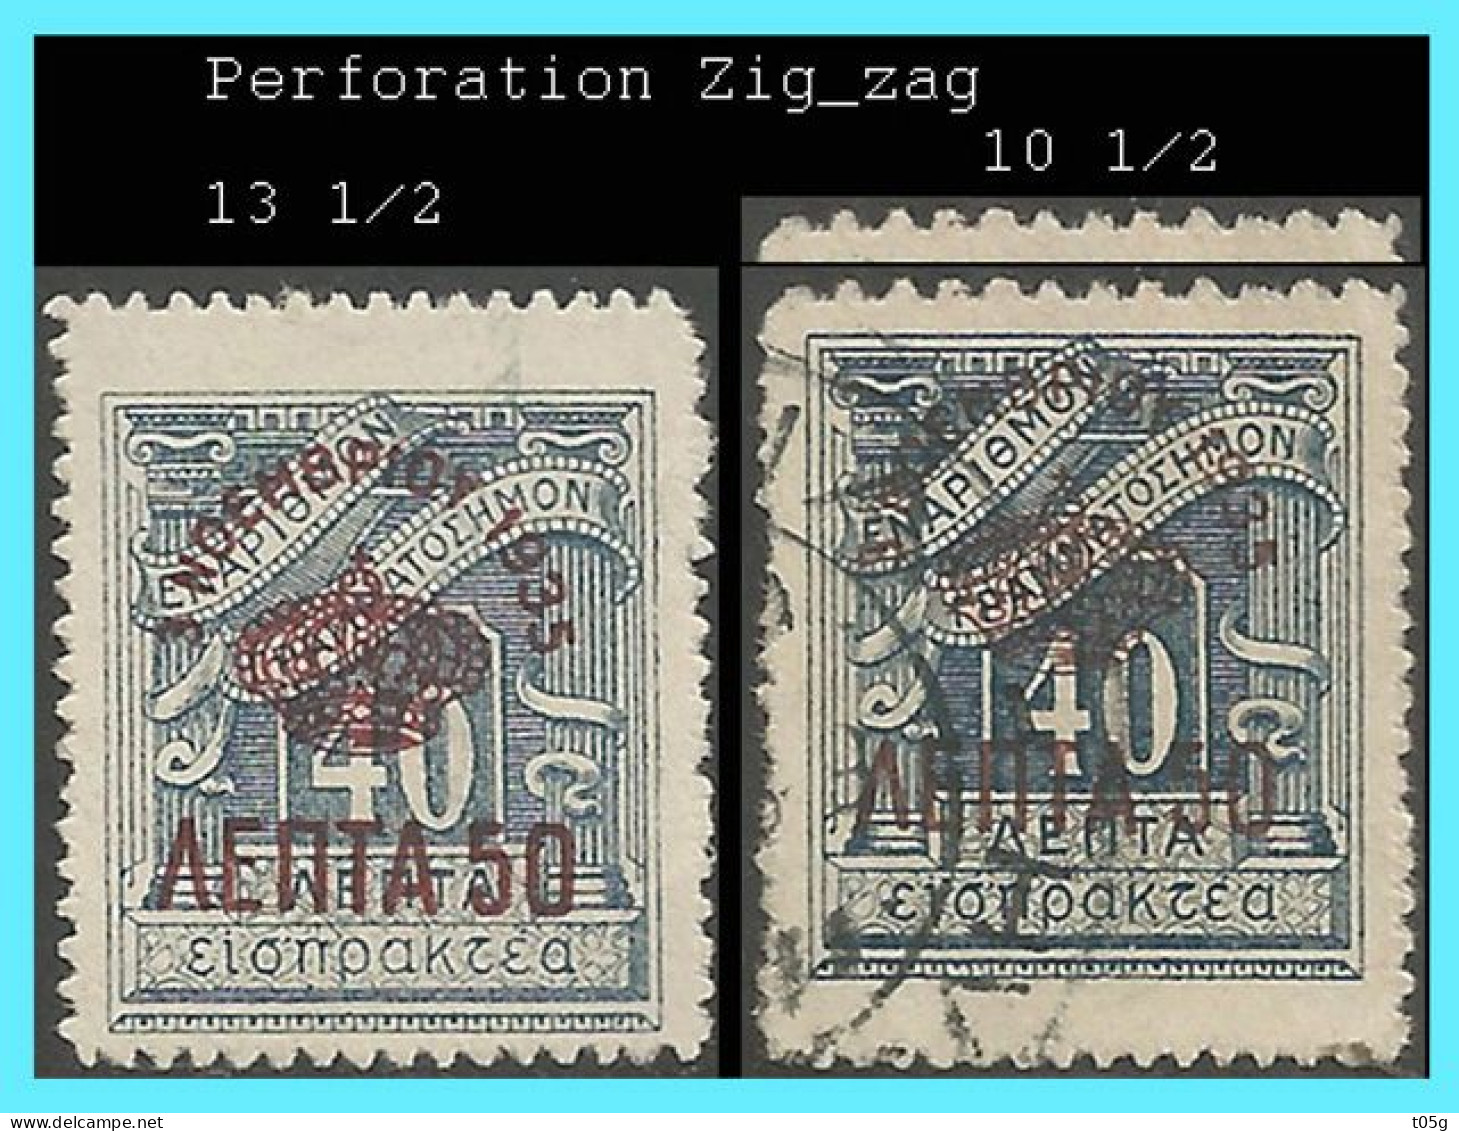 GREECE- GRECE - HELLAS 1935: 50L+40L With Perforation Zig-zag 10 1/2 Restoration Of Monarchy From Set Used - Used Stamps